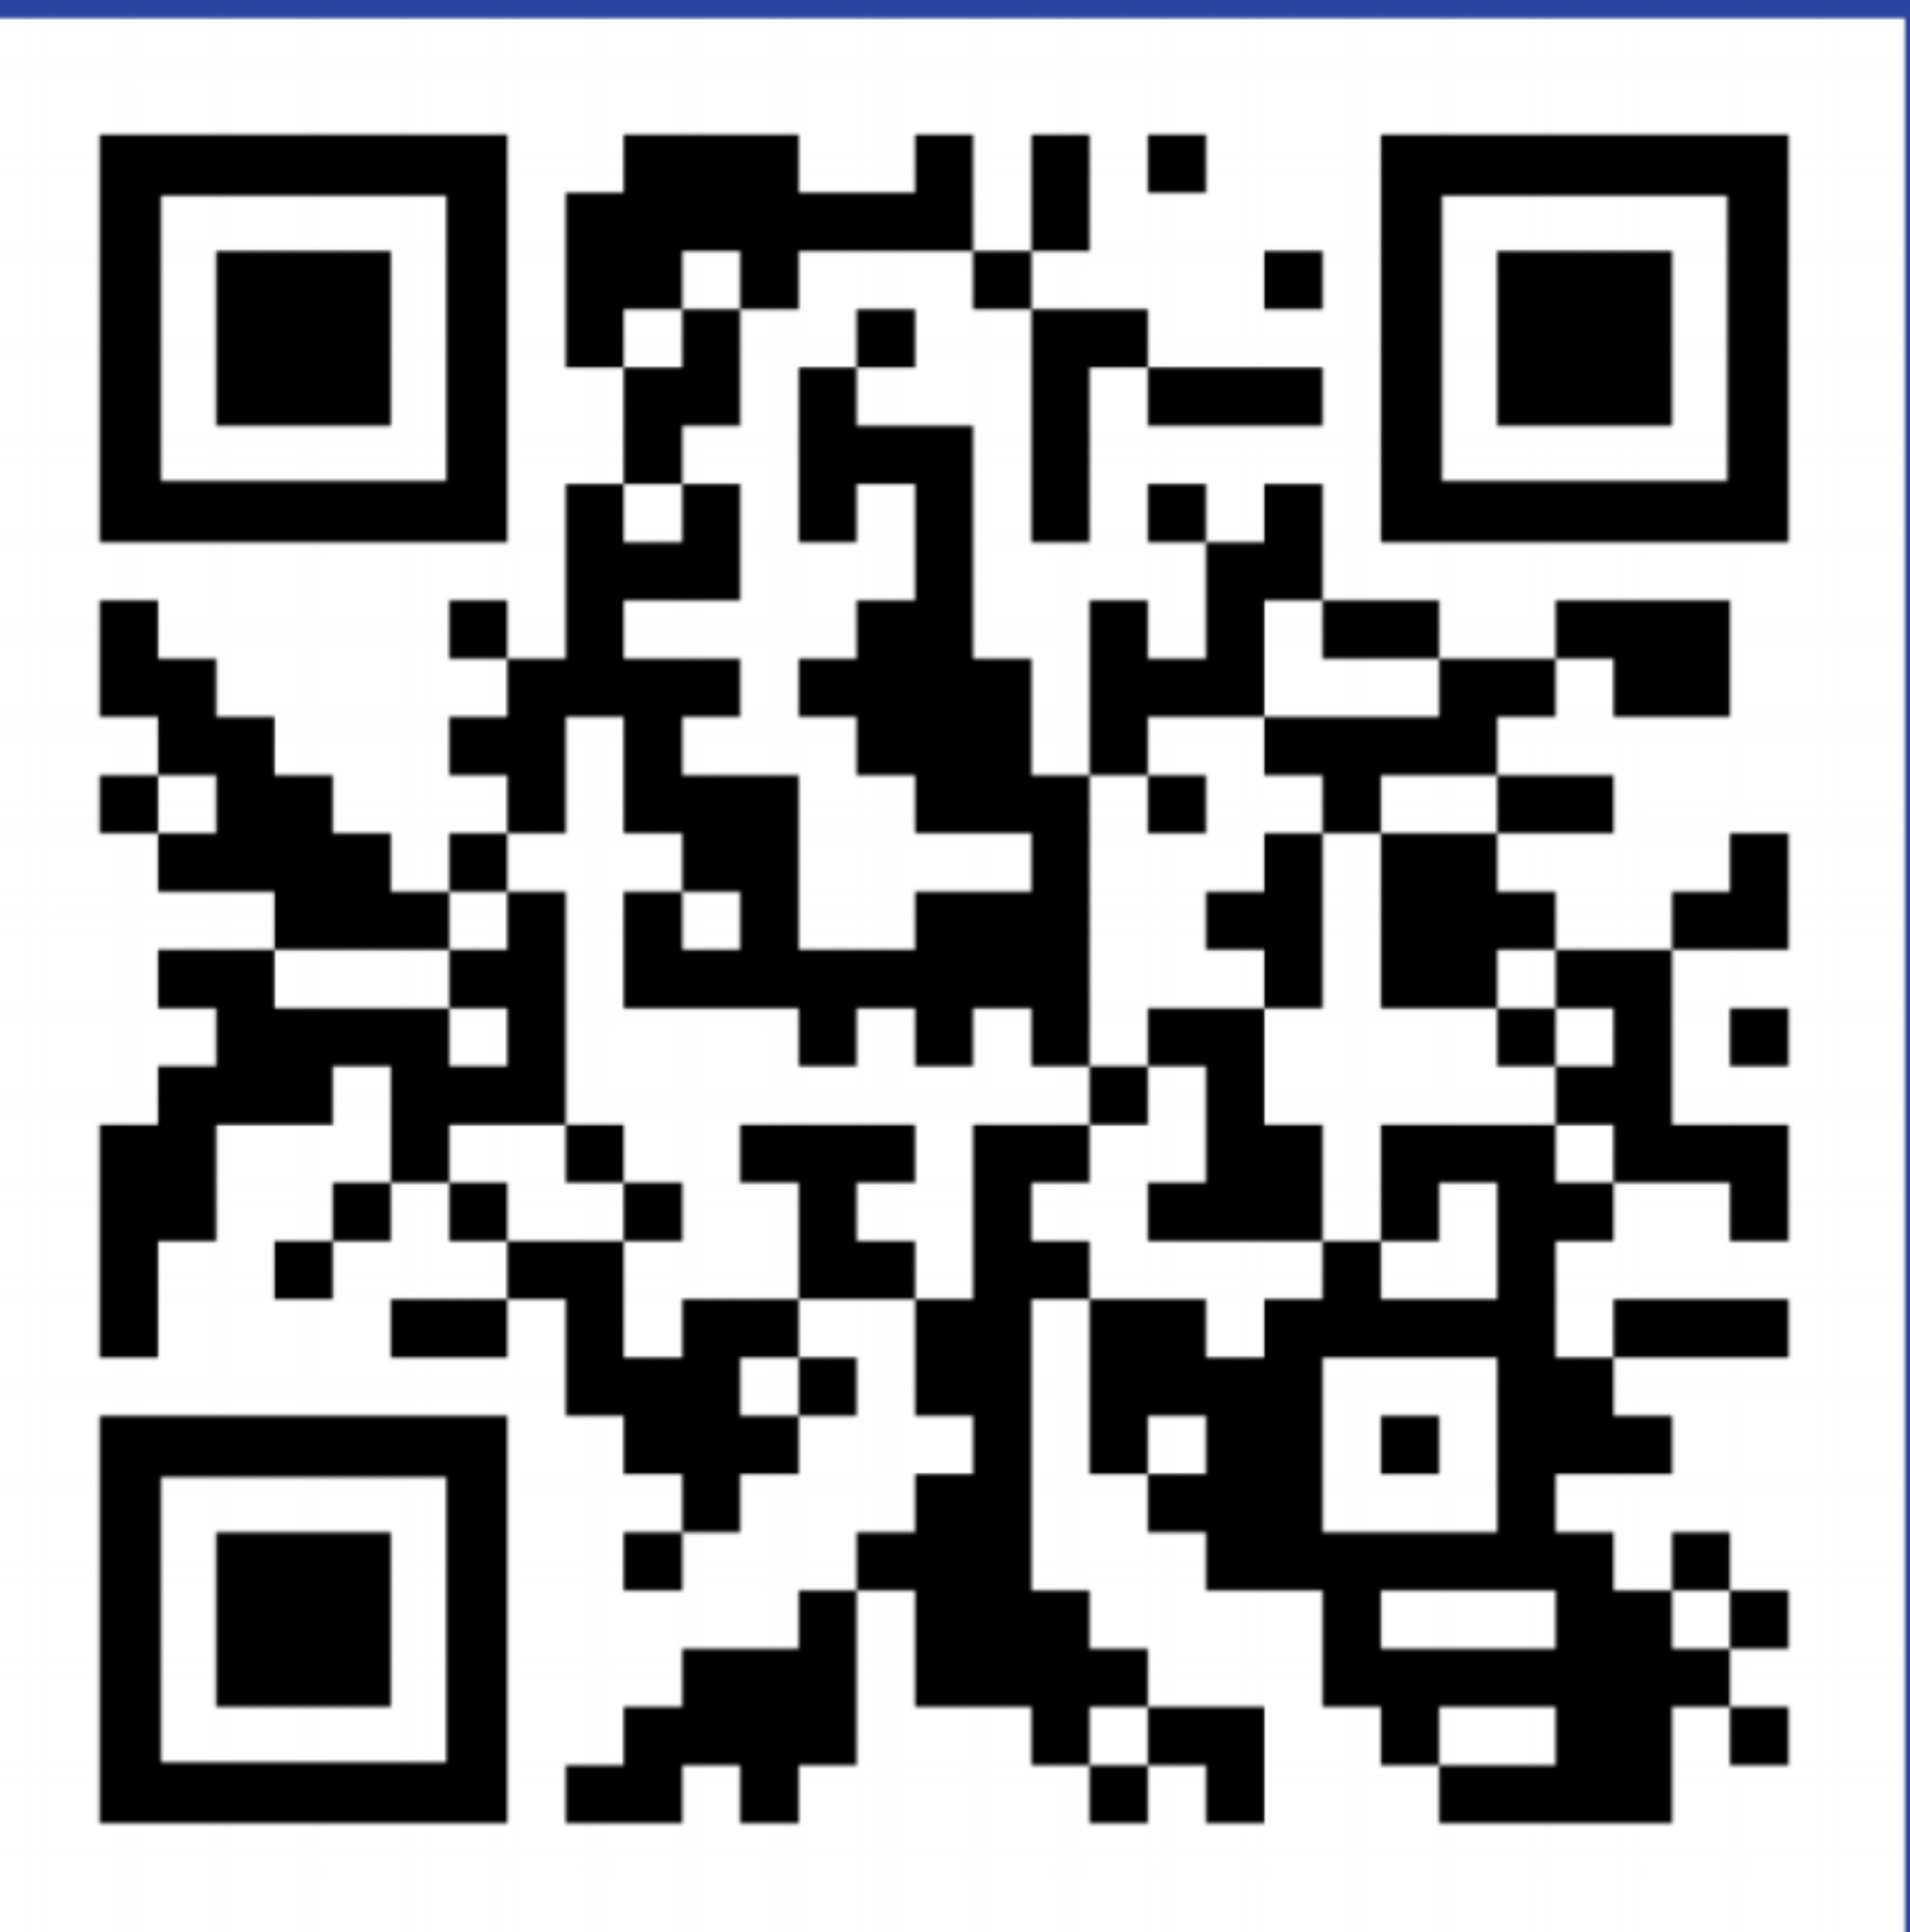 QR Code - Scan to visit vaccineappointments.virginia.gov